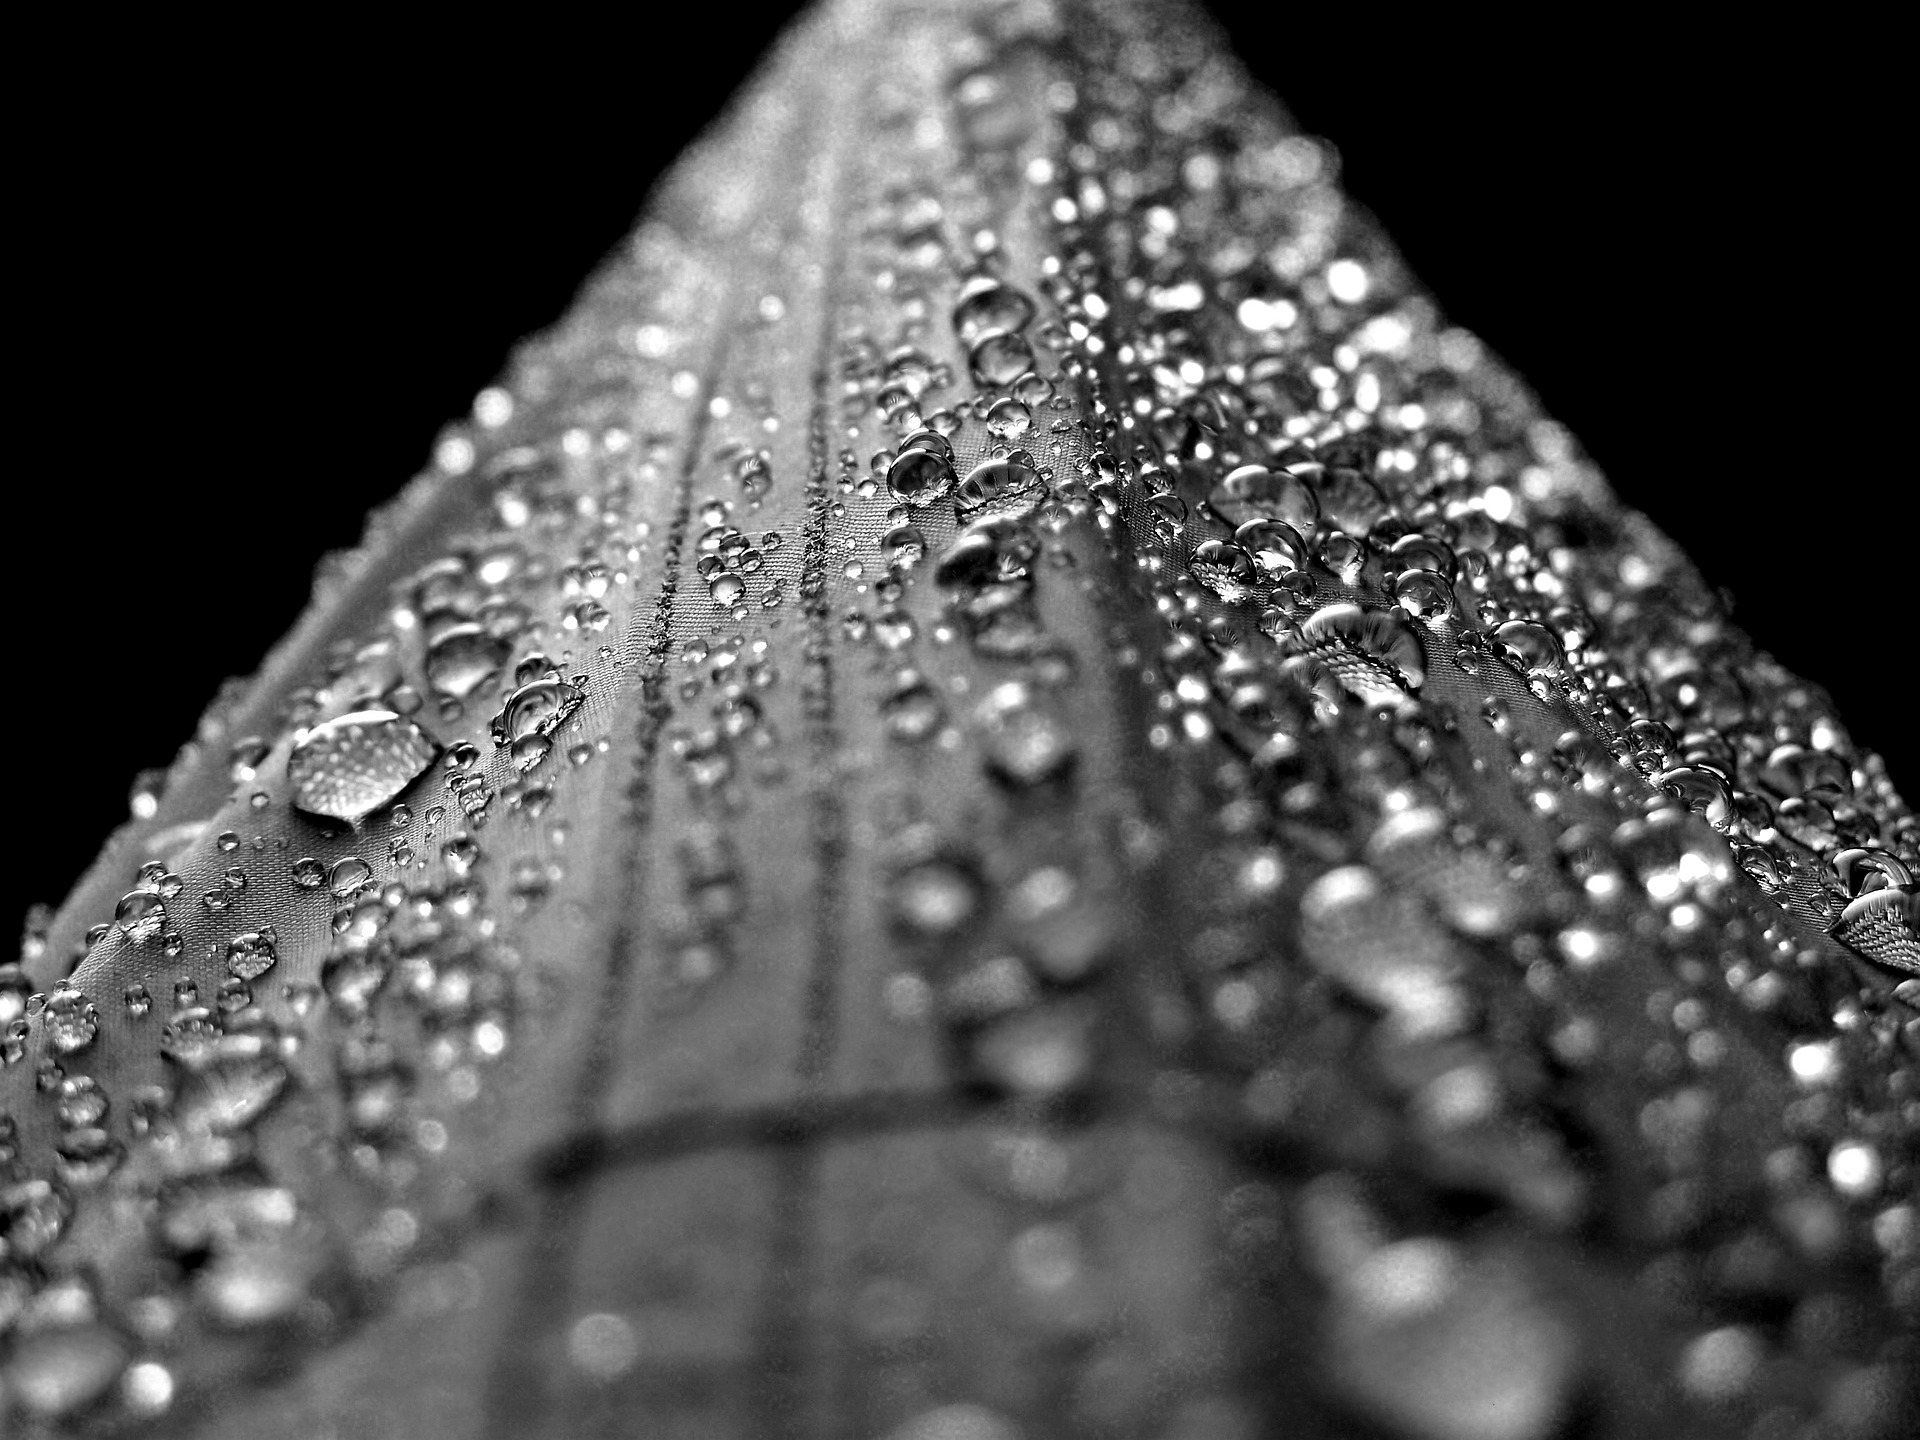 Water droplets photo